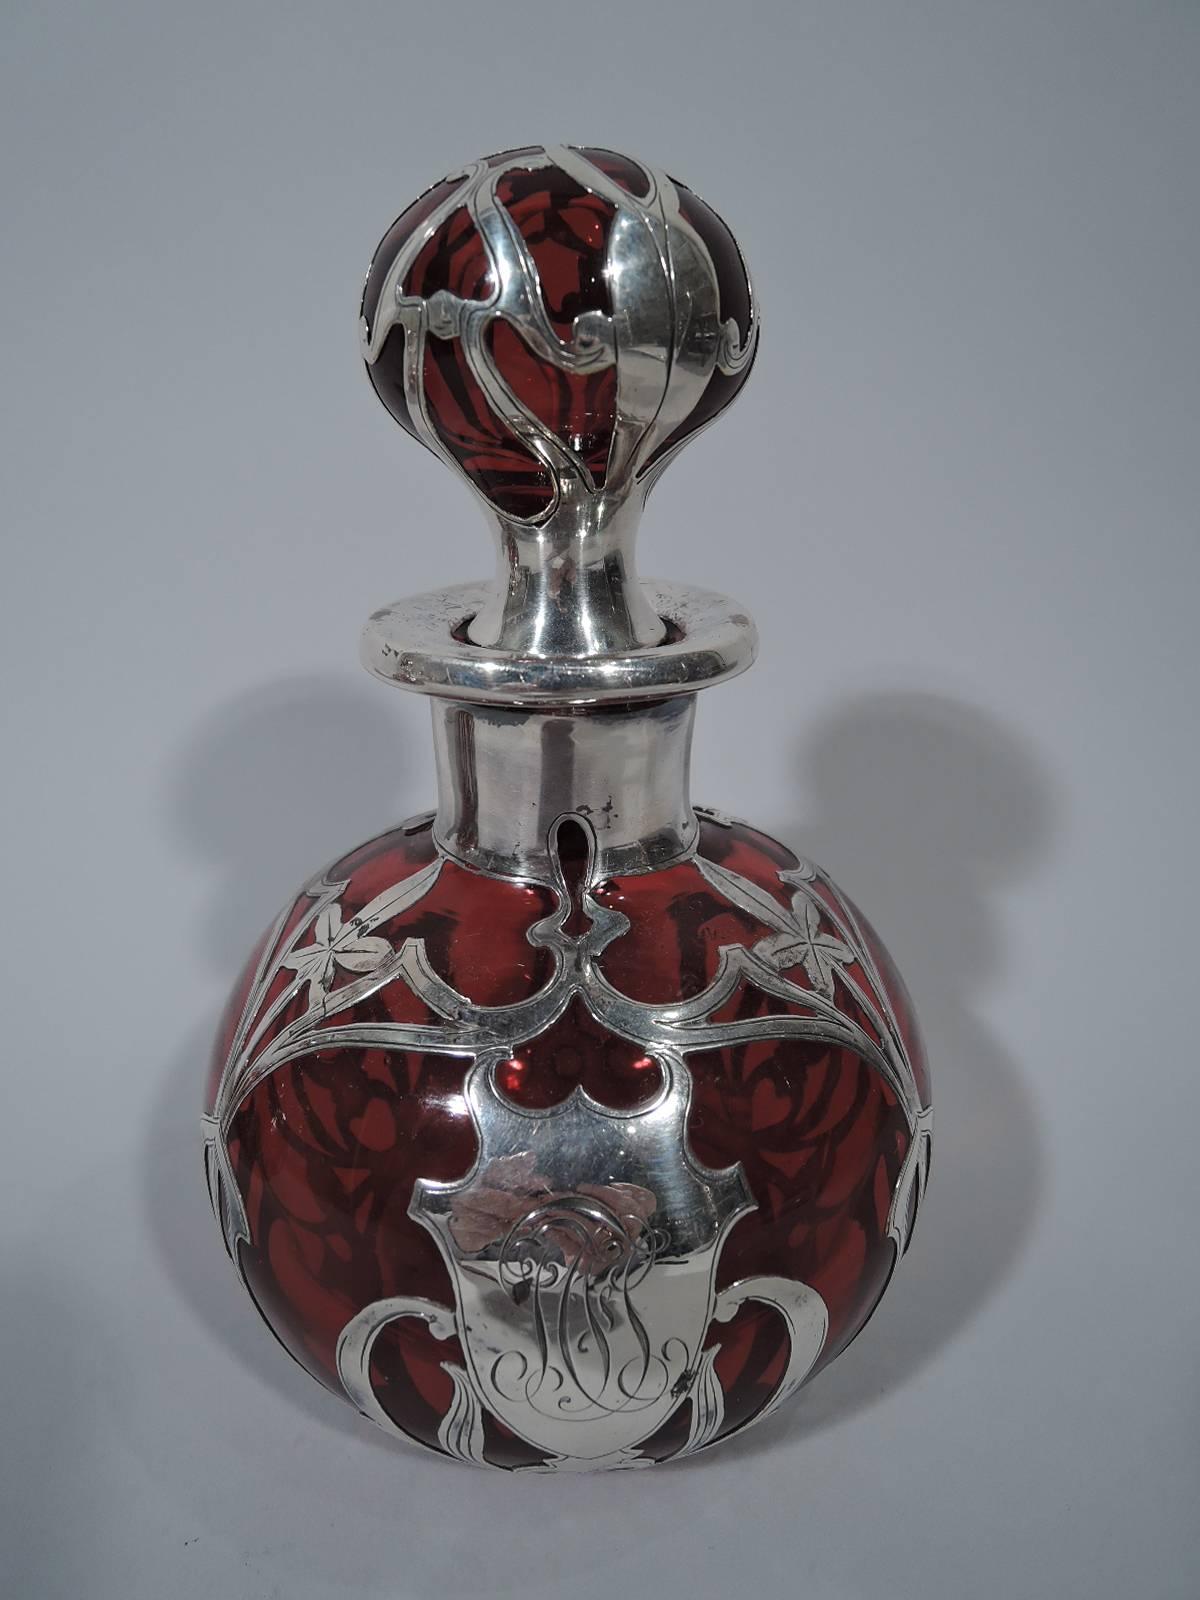 Pair of red glass perfumes with silver overlay. Made by Gorham in Providence, circa 1900. Each: Globular with short neck and everted rim. Ball stopper with short plug. Repeating overlay pattern with whiplash lines and scrolls as well as stylized